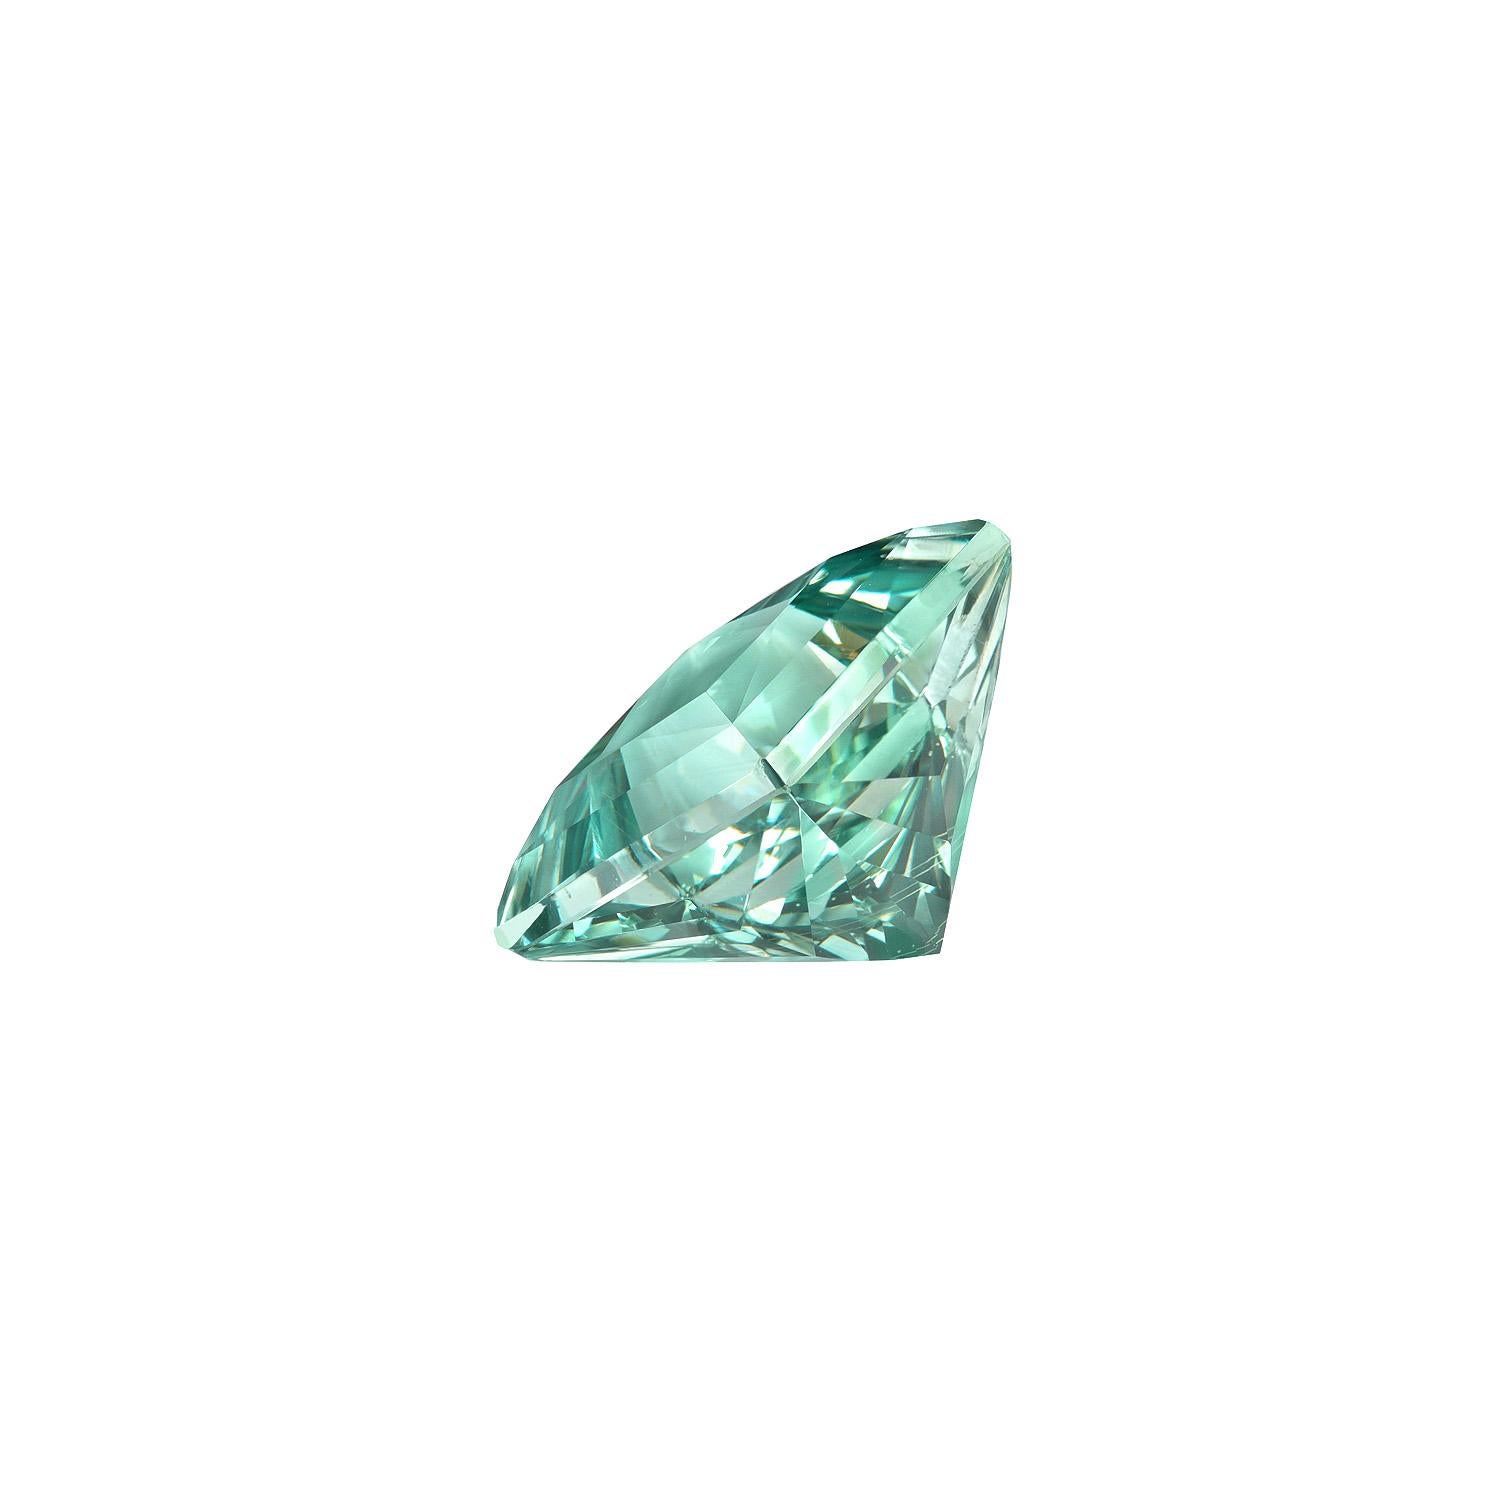 Magnificent pastel, Cyan, bluish Green Beryl, princess-cut gem, weighing a total of 15.52 carats, offered loose to a spectacular lady.
Returns are accepted and paid by us within 7 days of delivery.
We offer supreme custom jewelry work upon request.